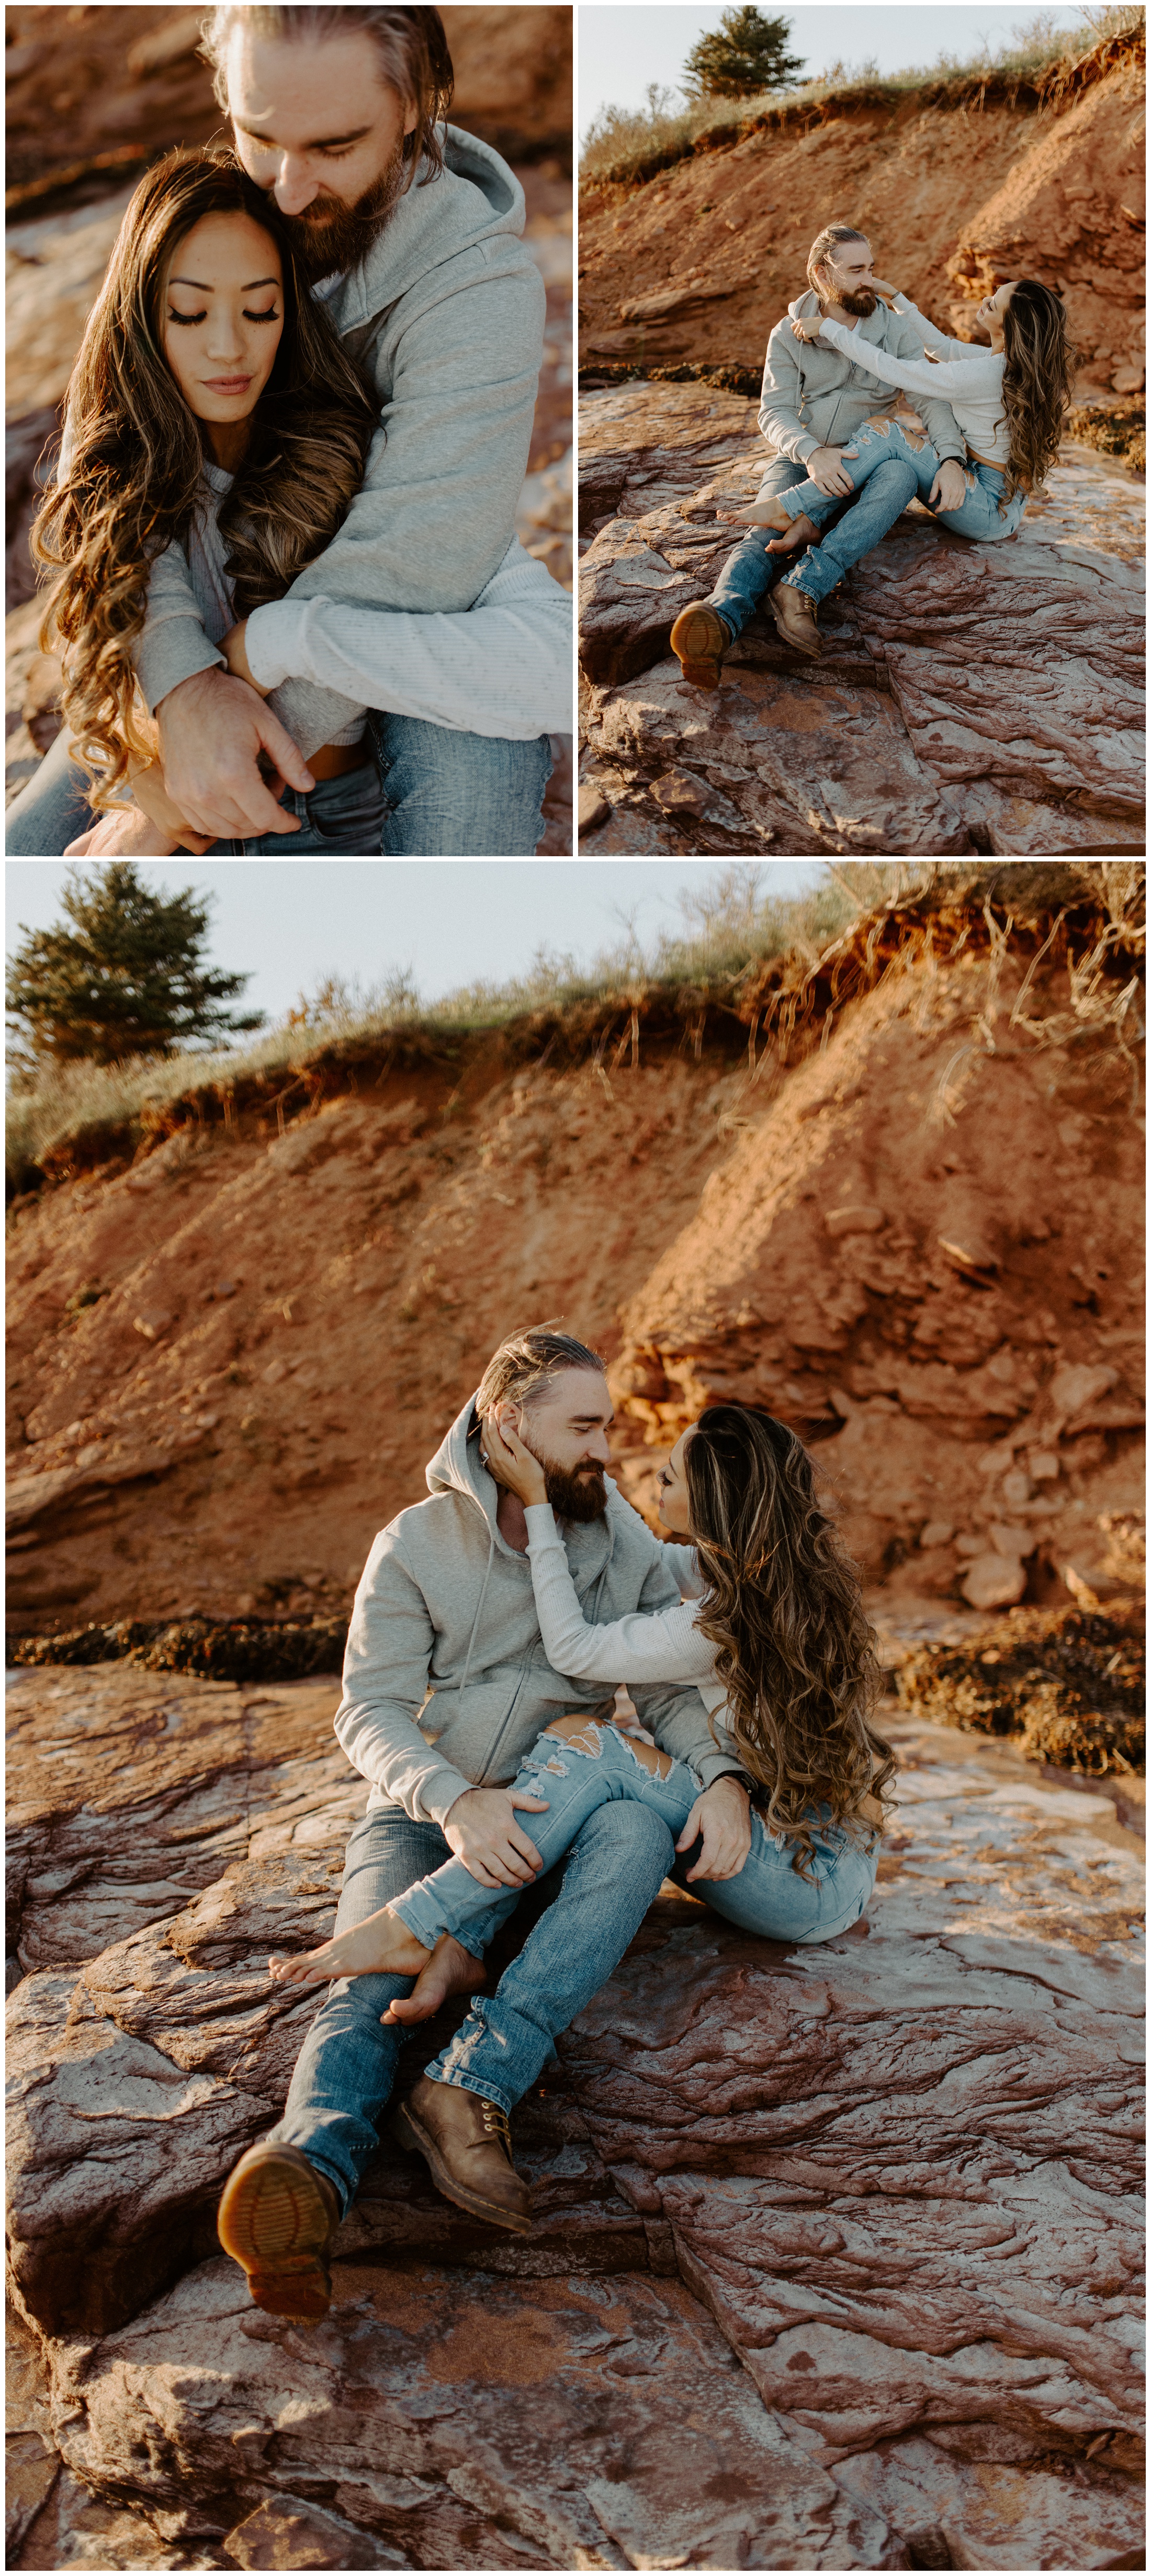 Red Sand Beach Engagements On Prince Edward Island at Sunset | Jessica Heron Images_0008.jpg